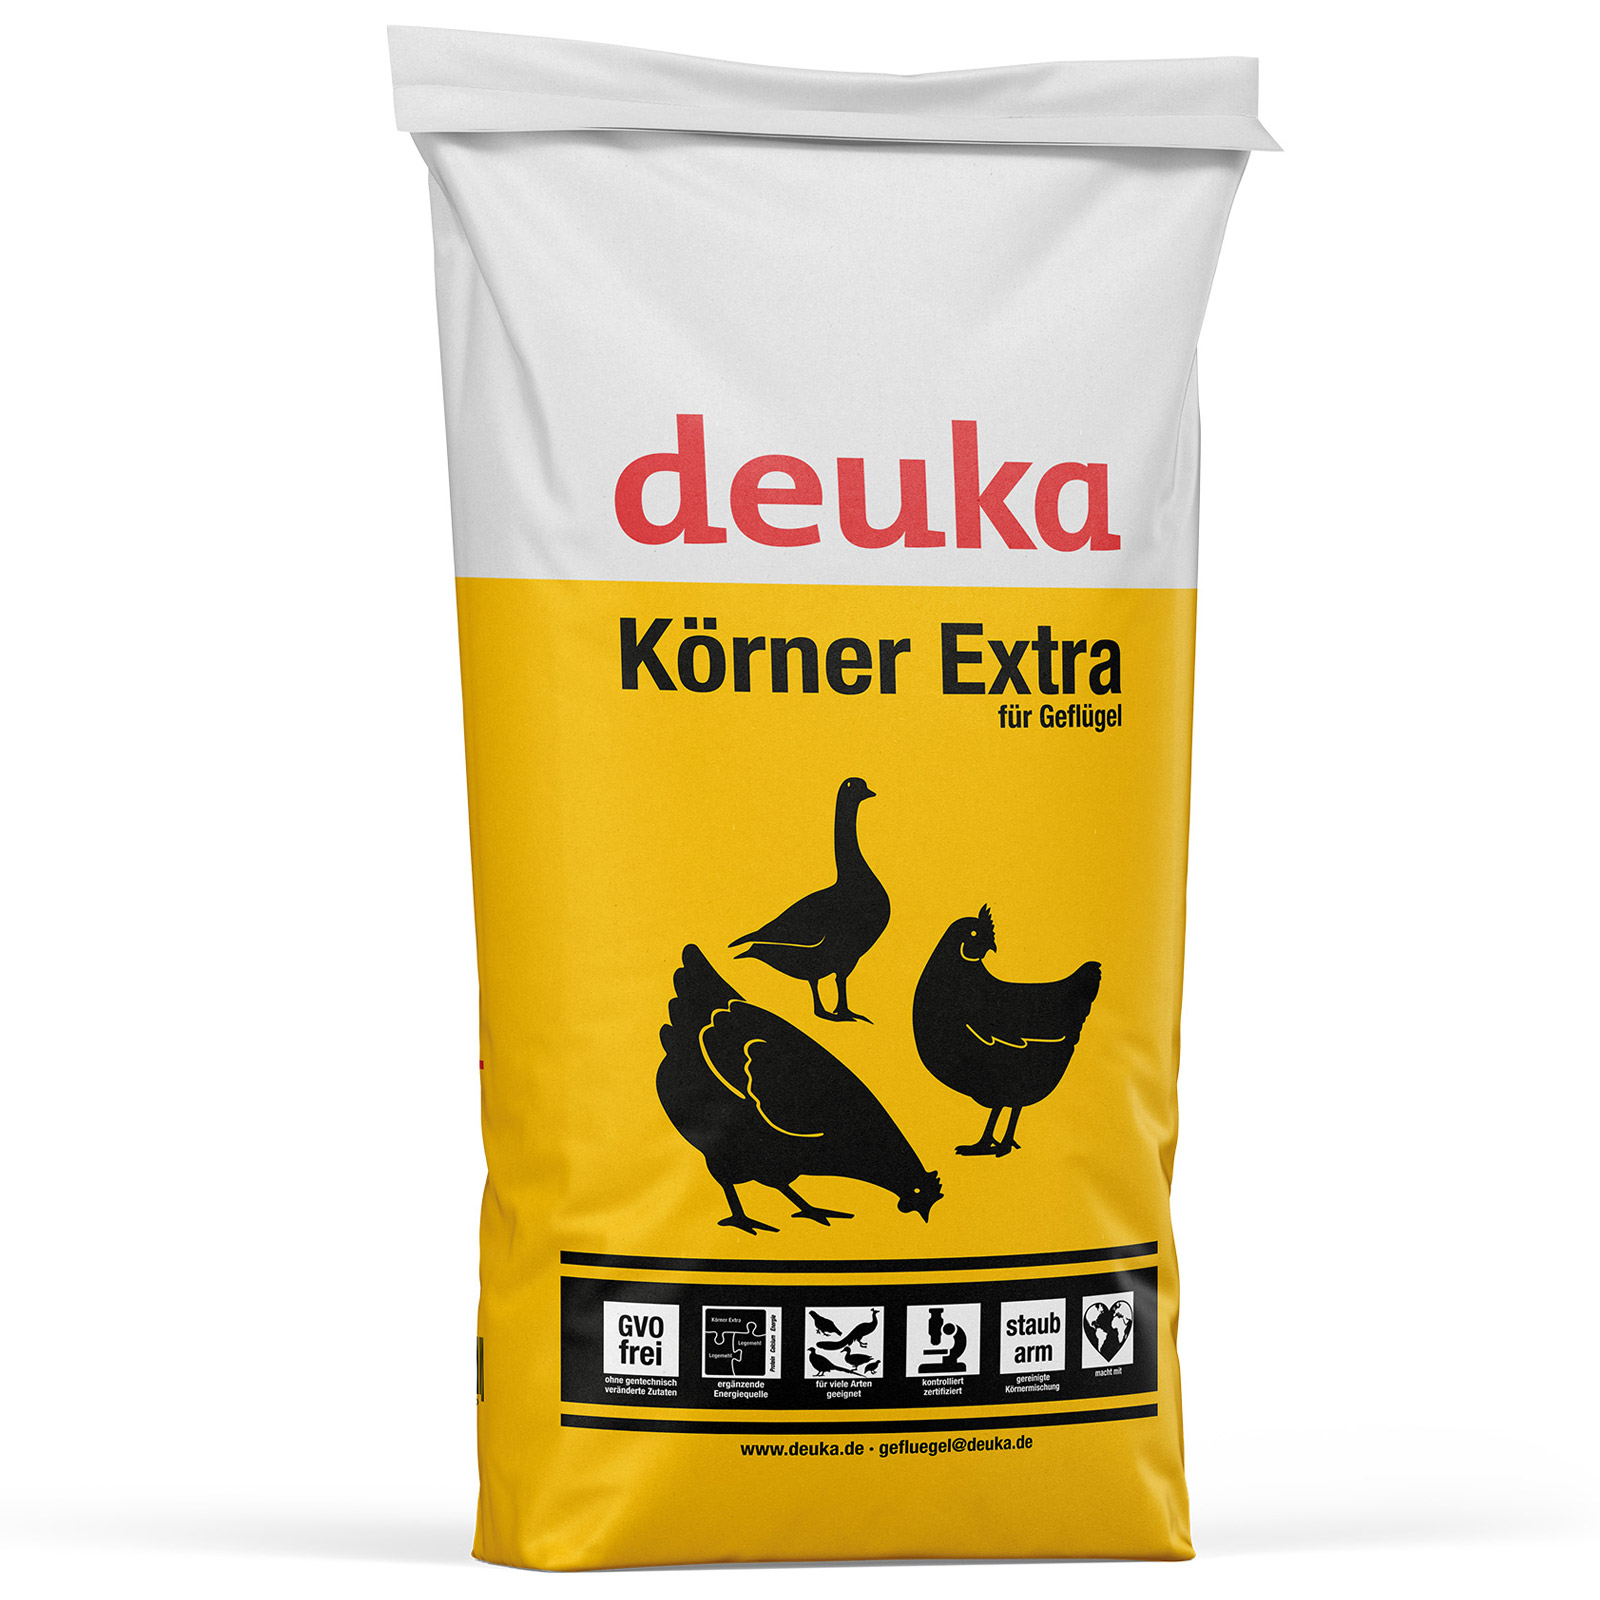 Deuka Grains Extra for Laying hens 25 kg